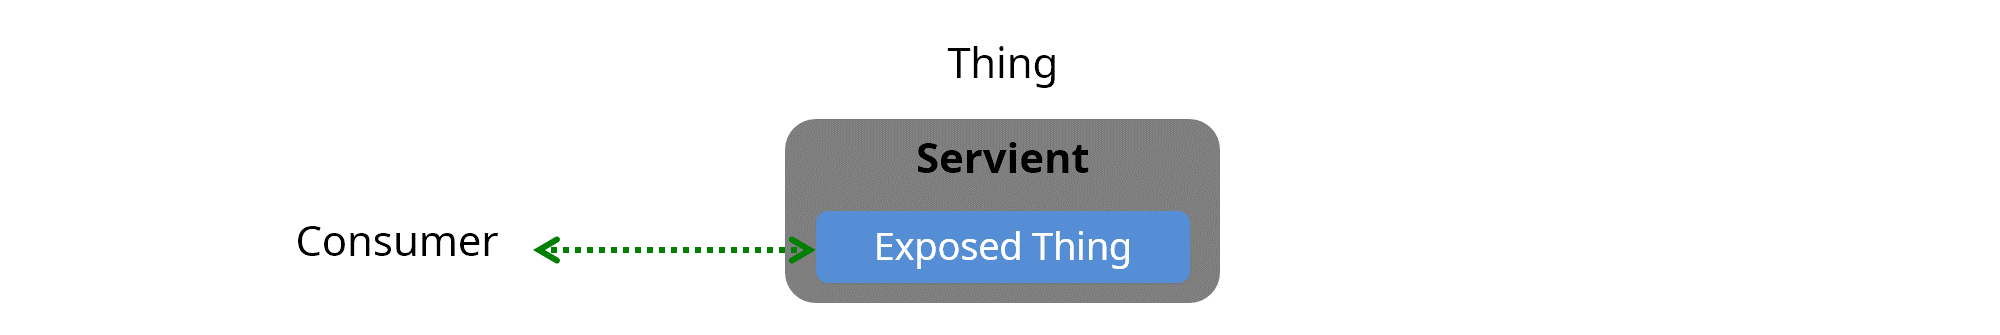 servient as a thing